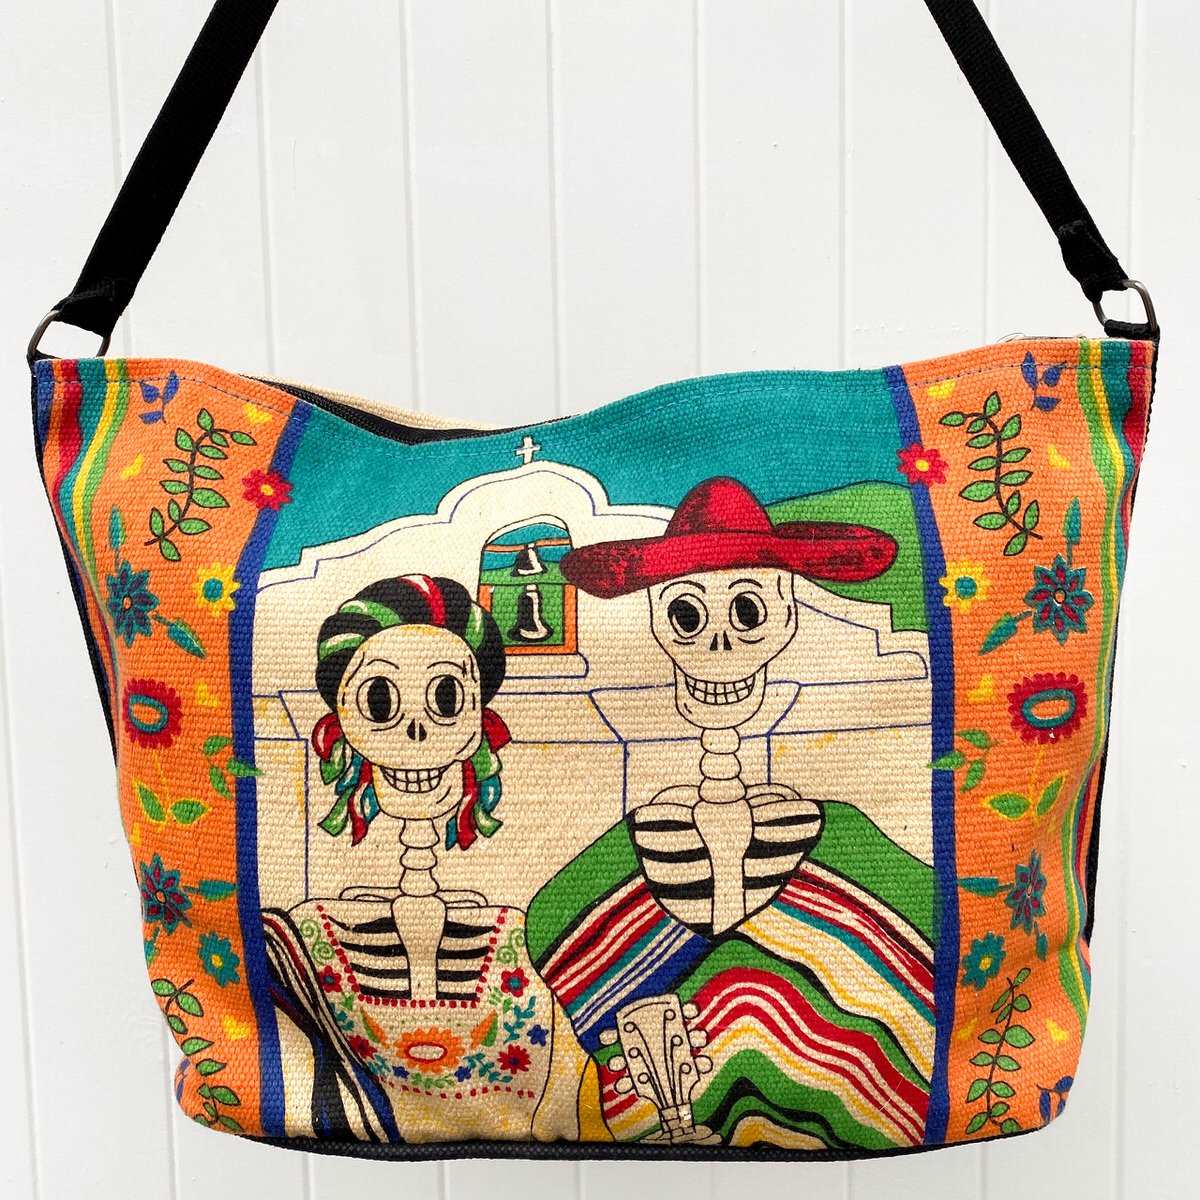 Day of the Dead American Gothic skeleton design silkscreened in bright colors, on cotton handbag with black cotton strap, shown against white background.